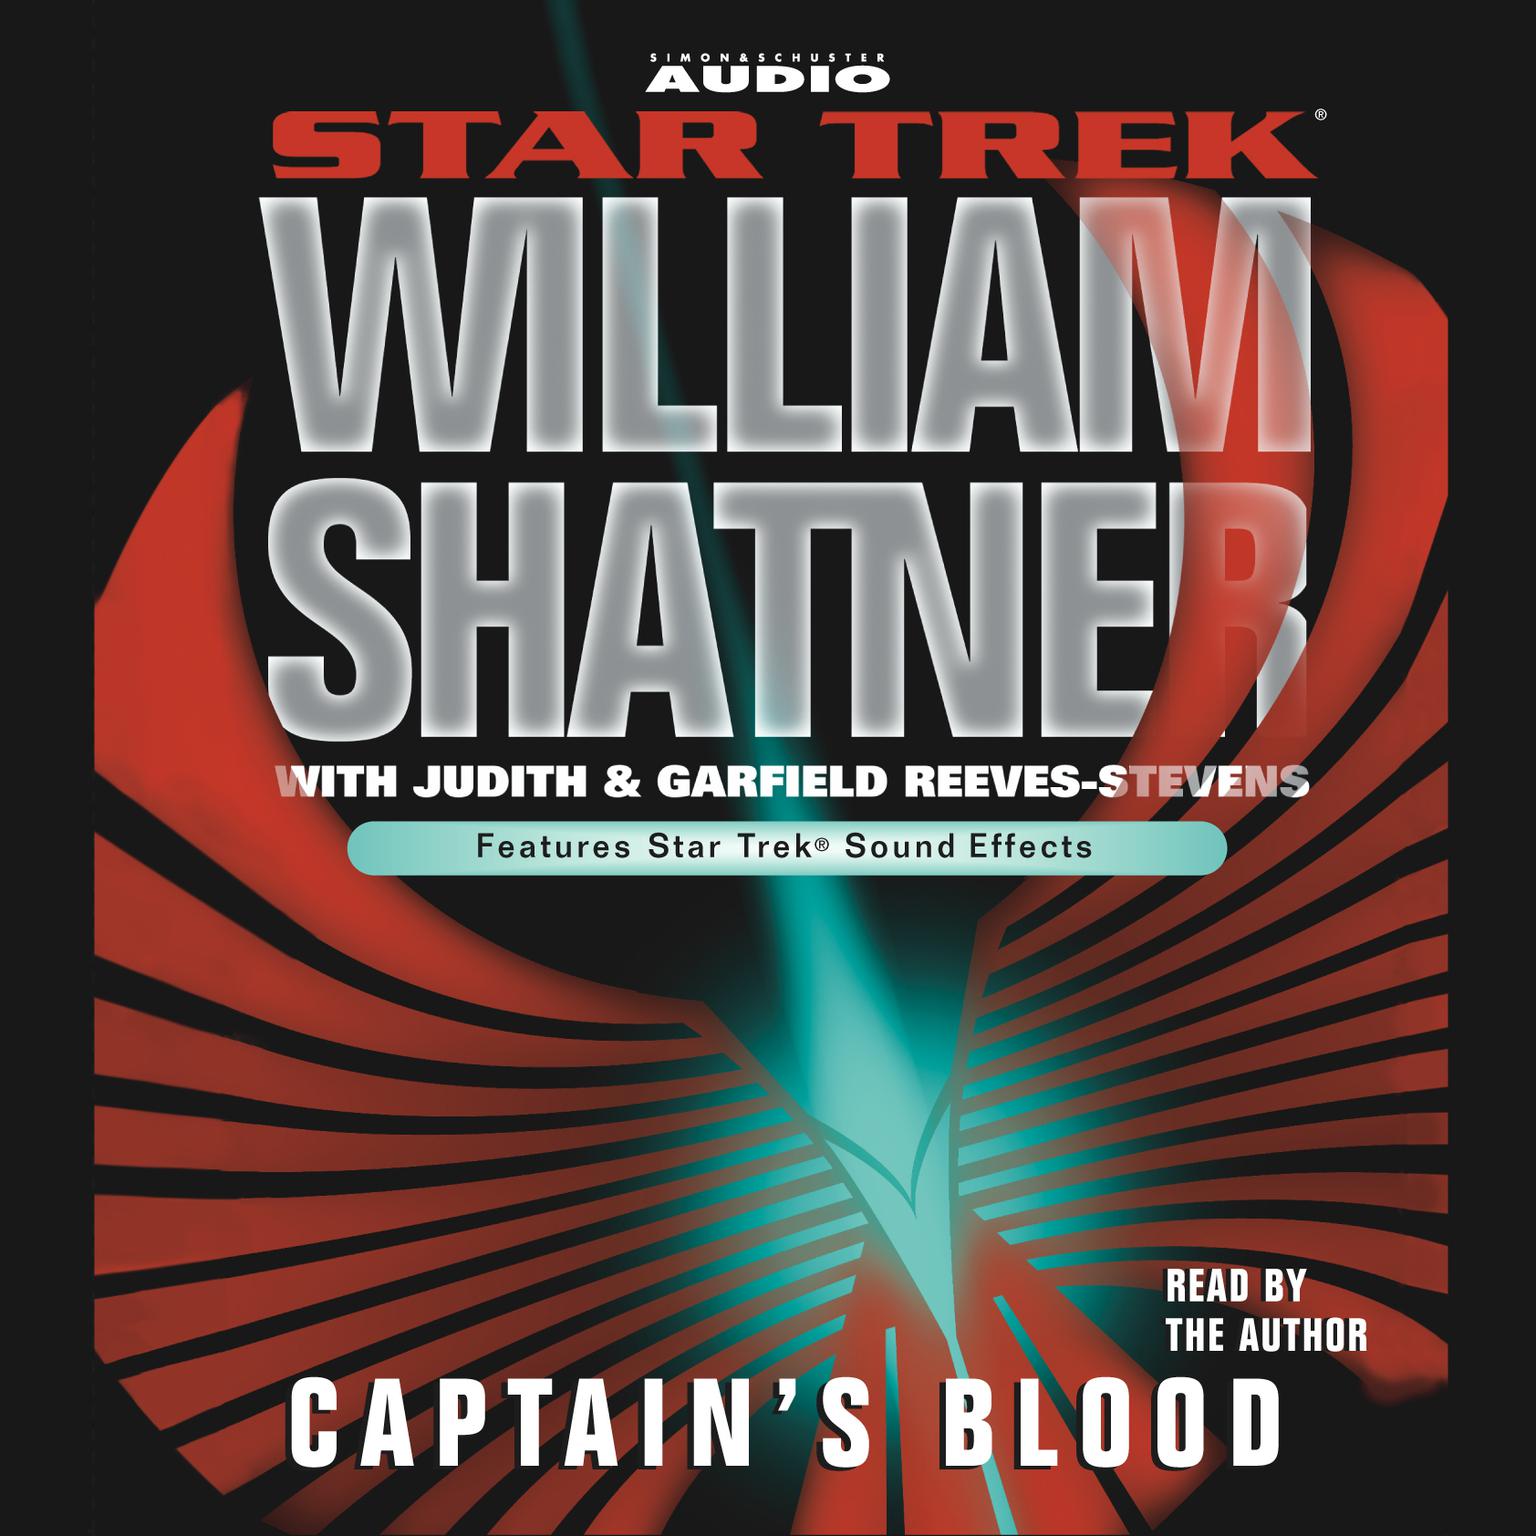 Captains Blood (Abridged) Audiobook, by William Shatner